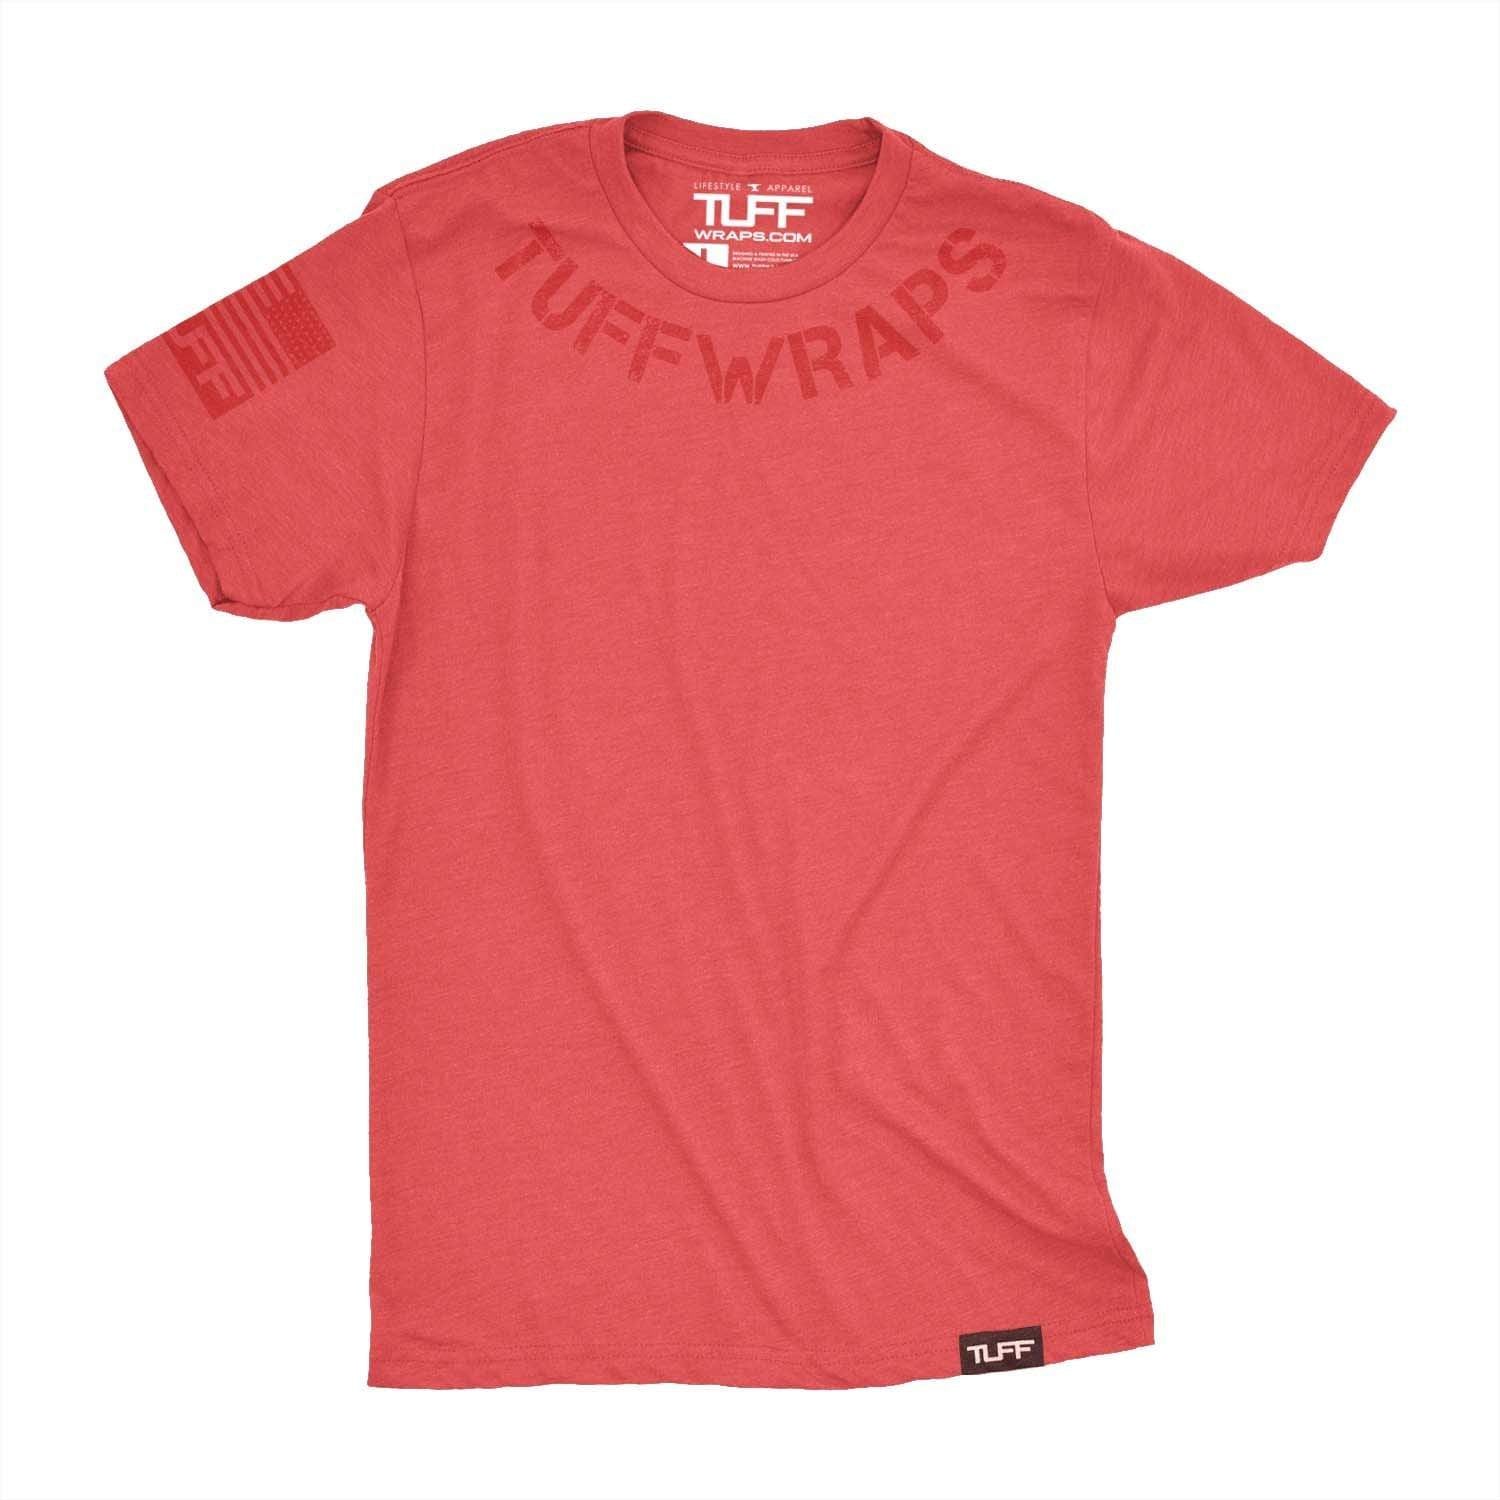 Solid Red TUFF Curve Tee S / Vintage Red TuffWraps.com